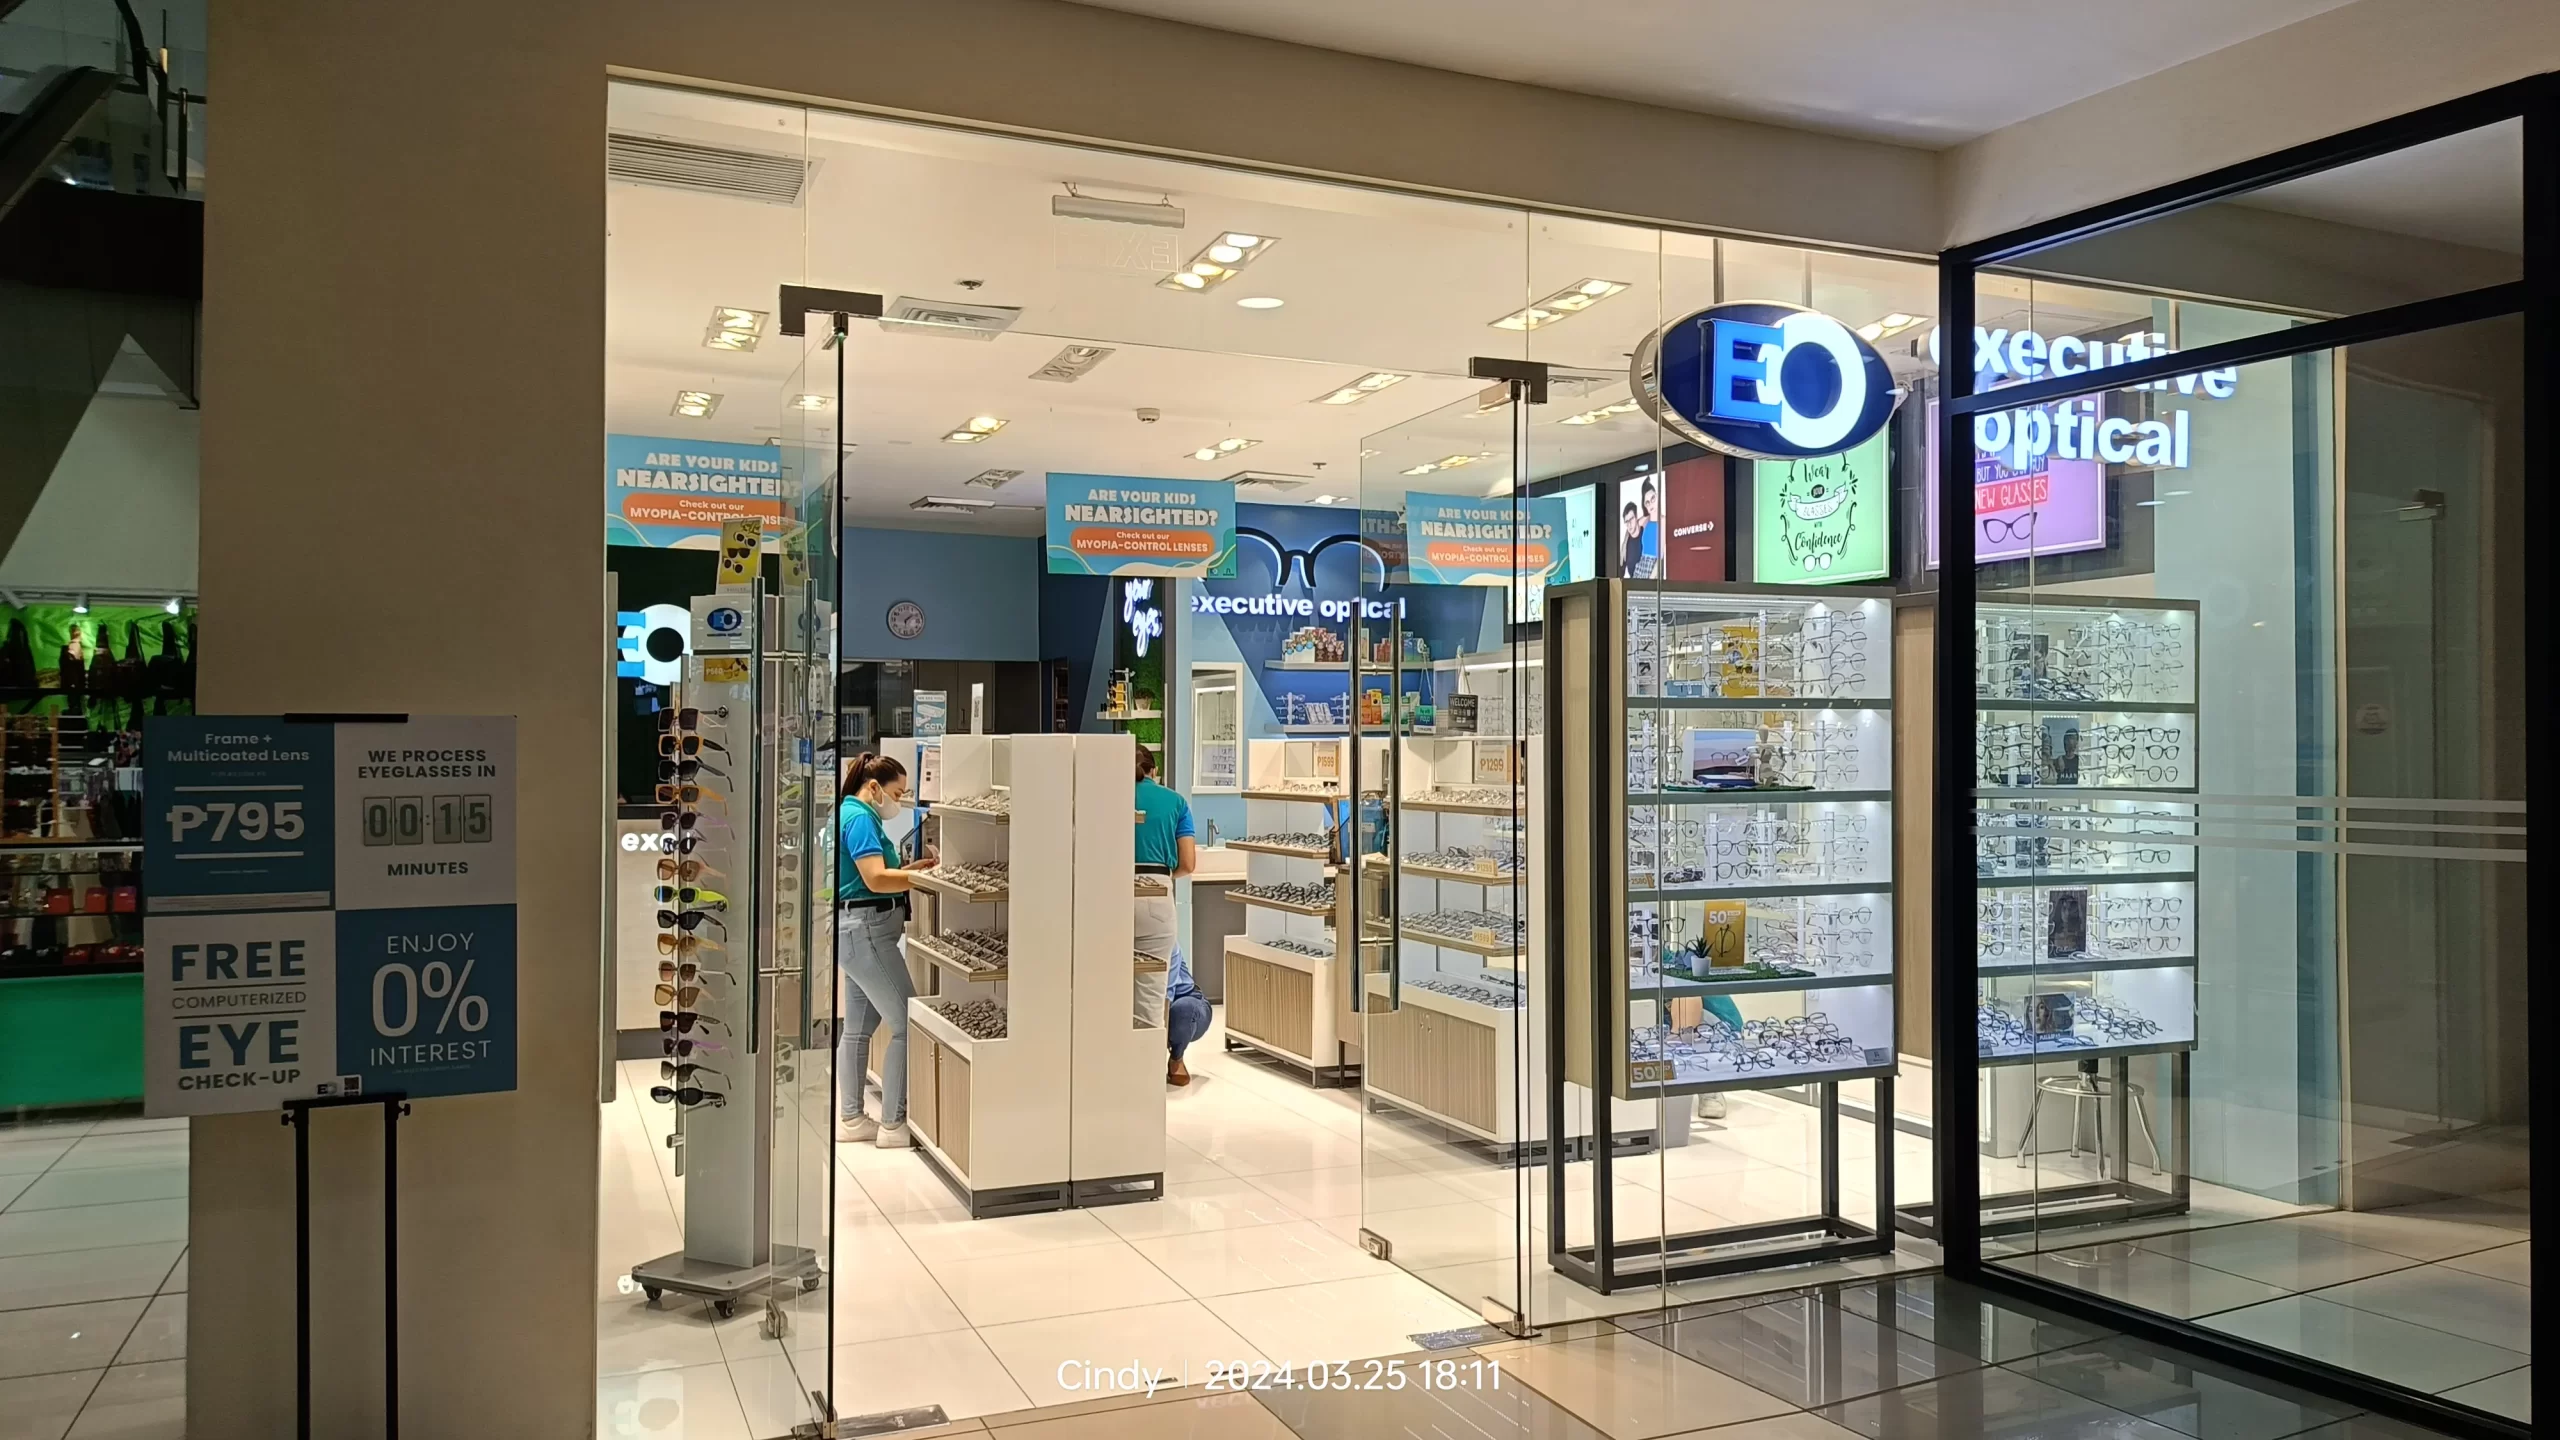 EO iMall Antipolo Branch - Sunglasses, Eyeglasses and Contact Lenses